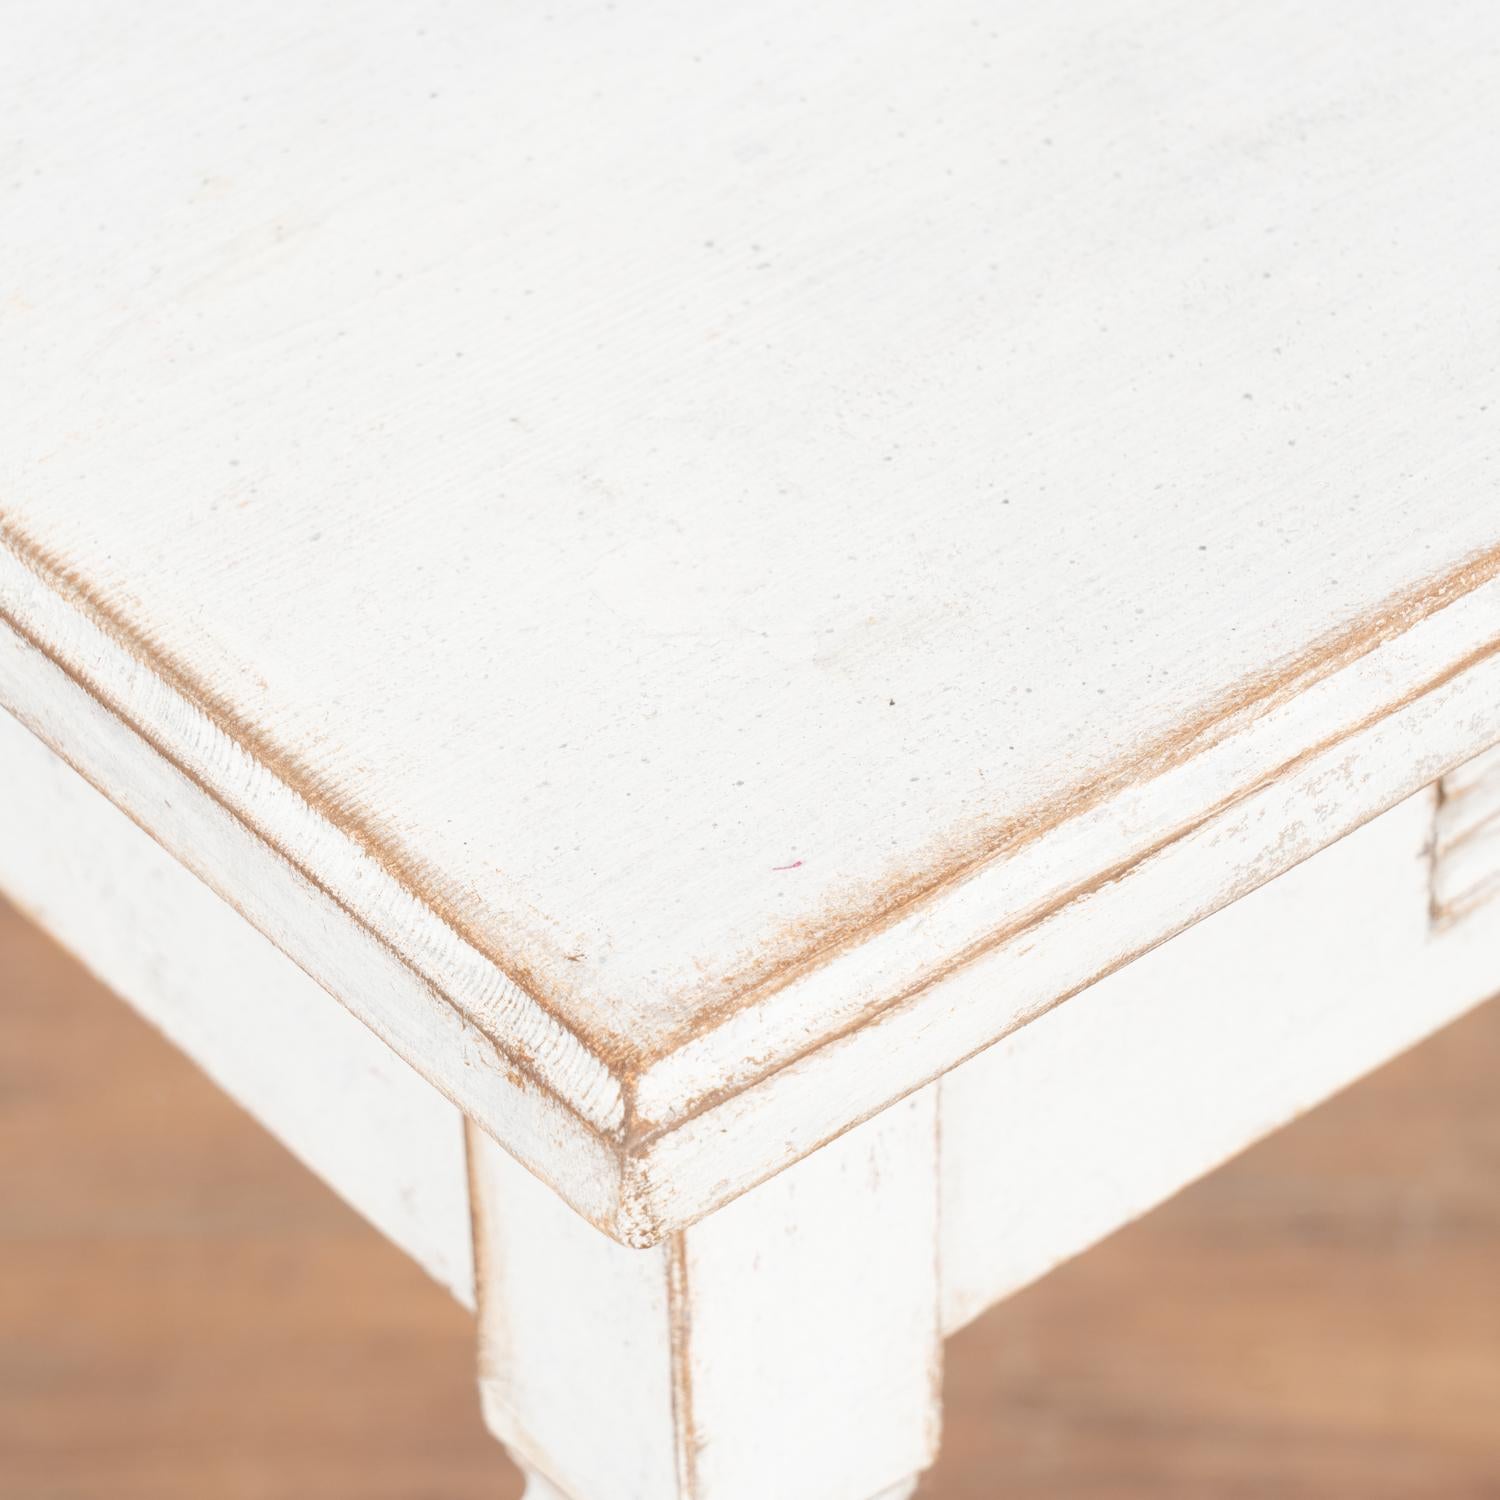 Antique Swedish Gustavian White Painted Side Table With Drawer, circa 1860-80 For Sale 2